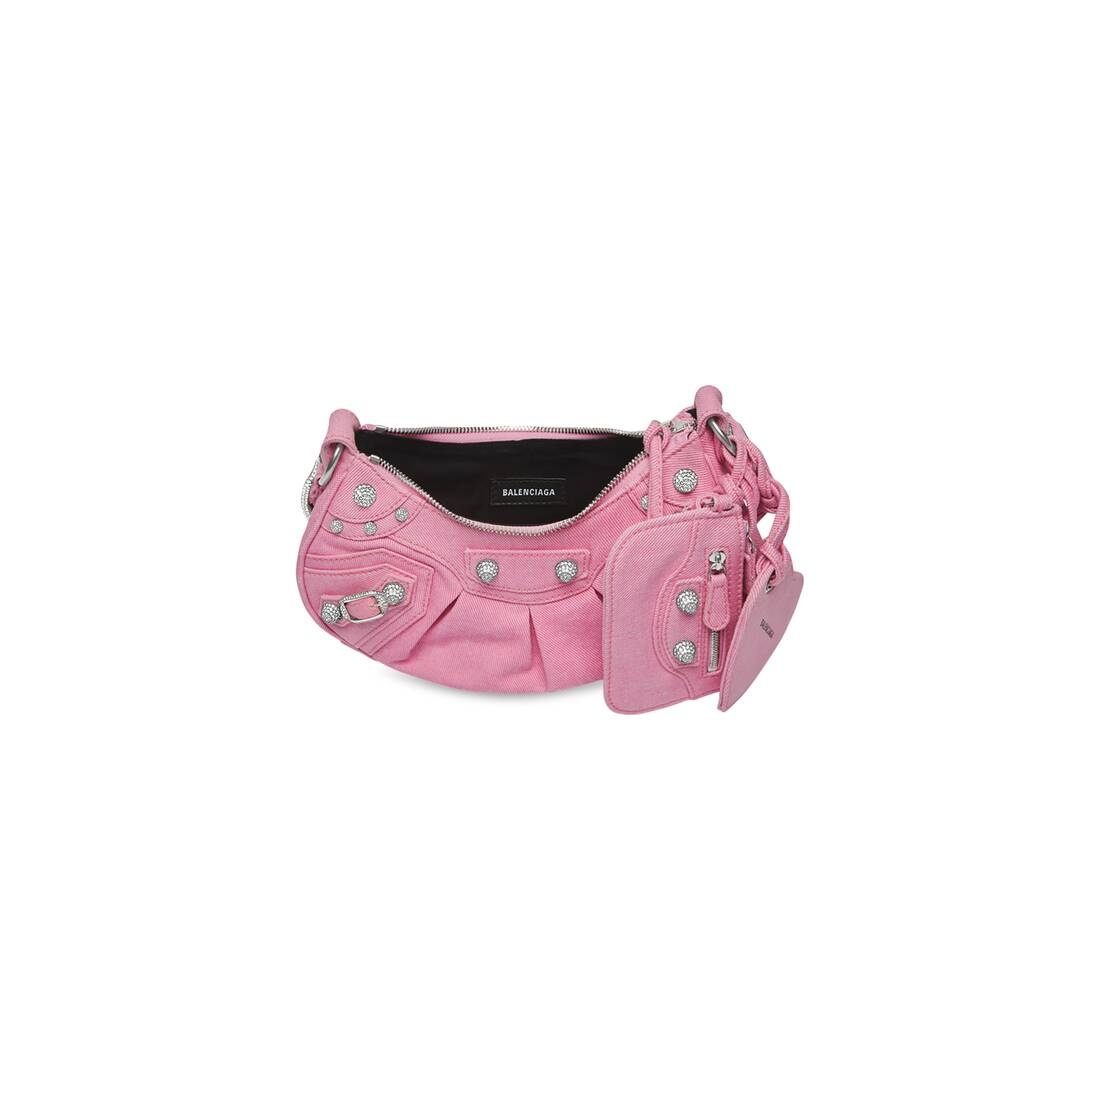 Women's Le Cagole Xs Shoulder Bag In Denim With Rhinestones in Pink - 4